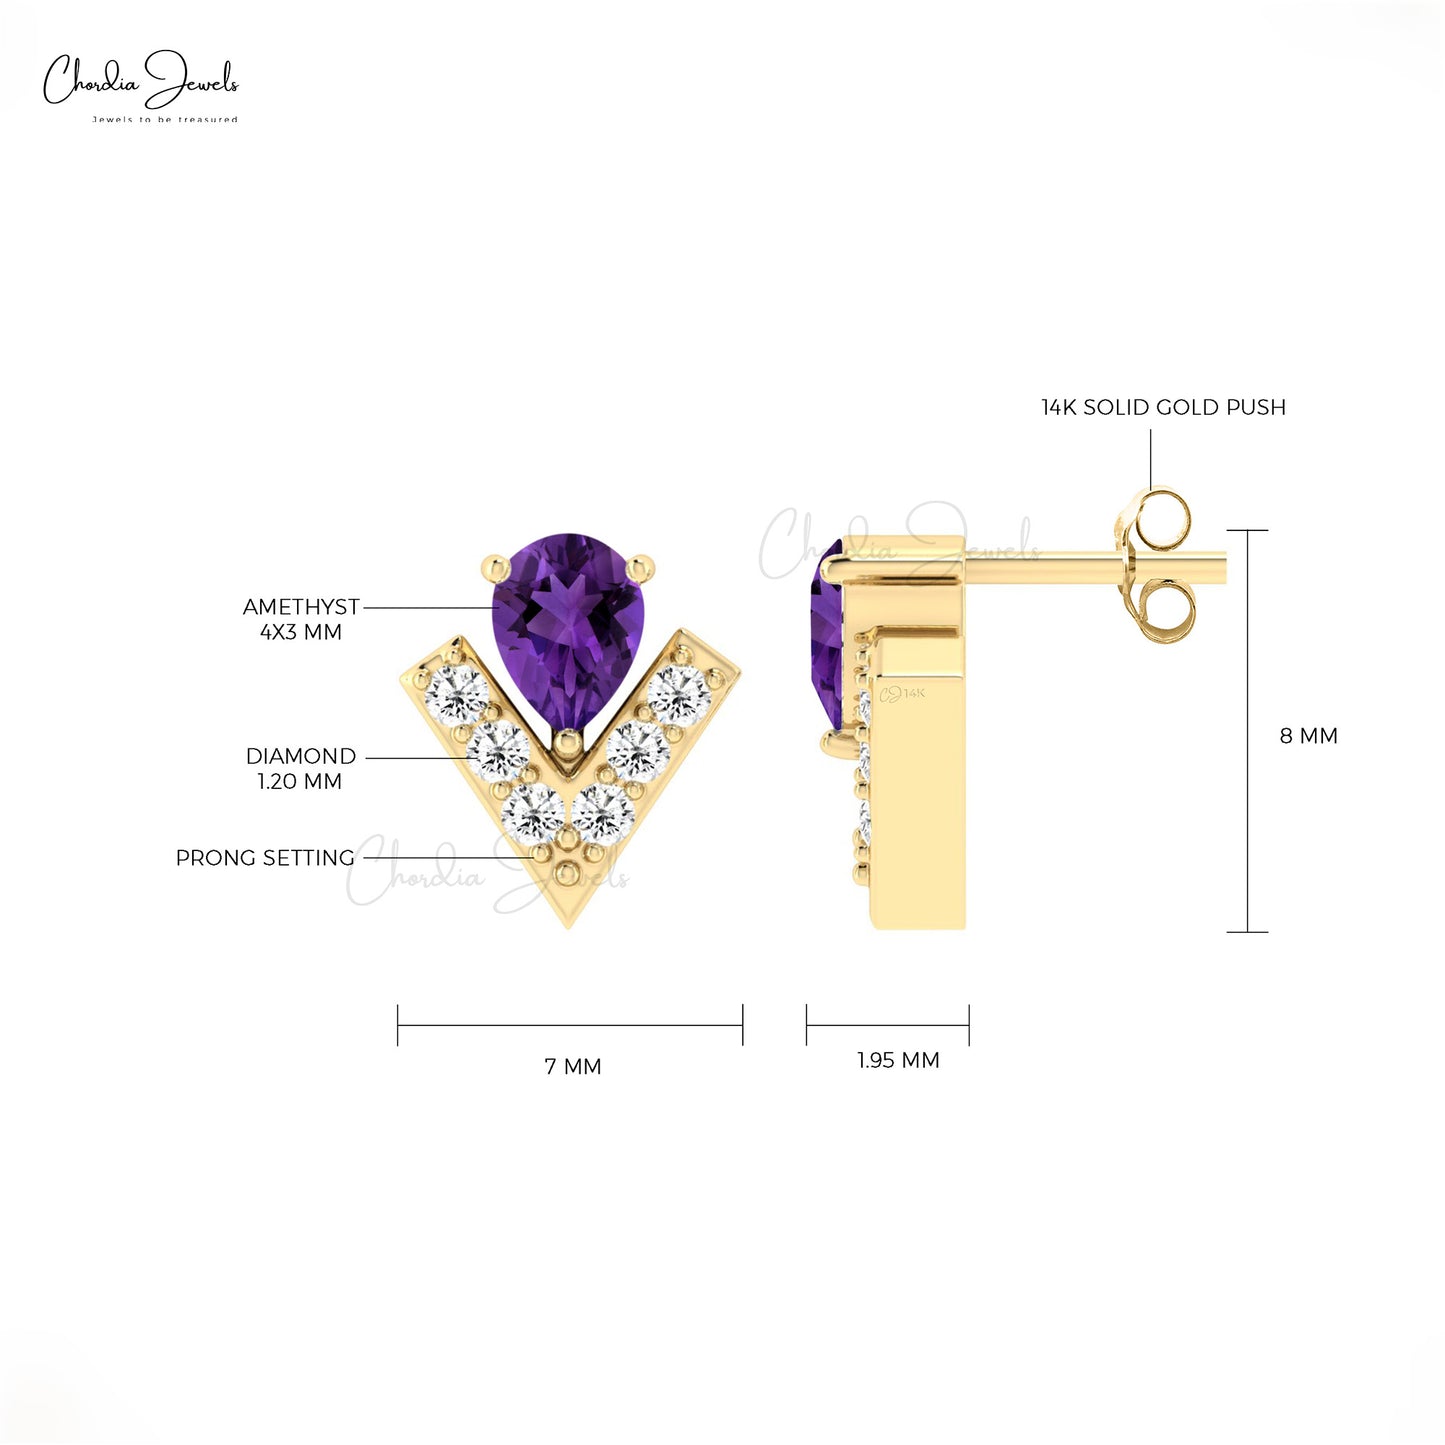 AAA Amethyst Dainty Studs 14k Real Gold Diamond Accented Earrings 4x3mm Pear Cut Natural Gemstone Summer Jewelry For Her